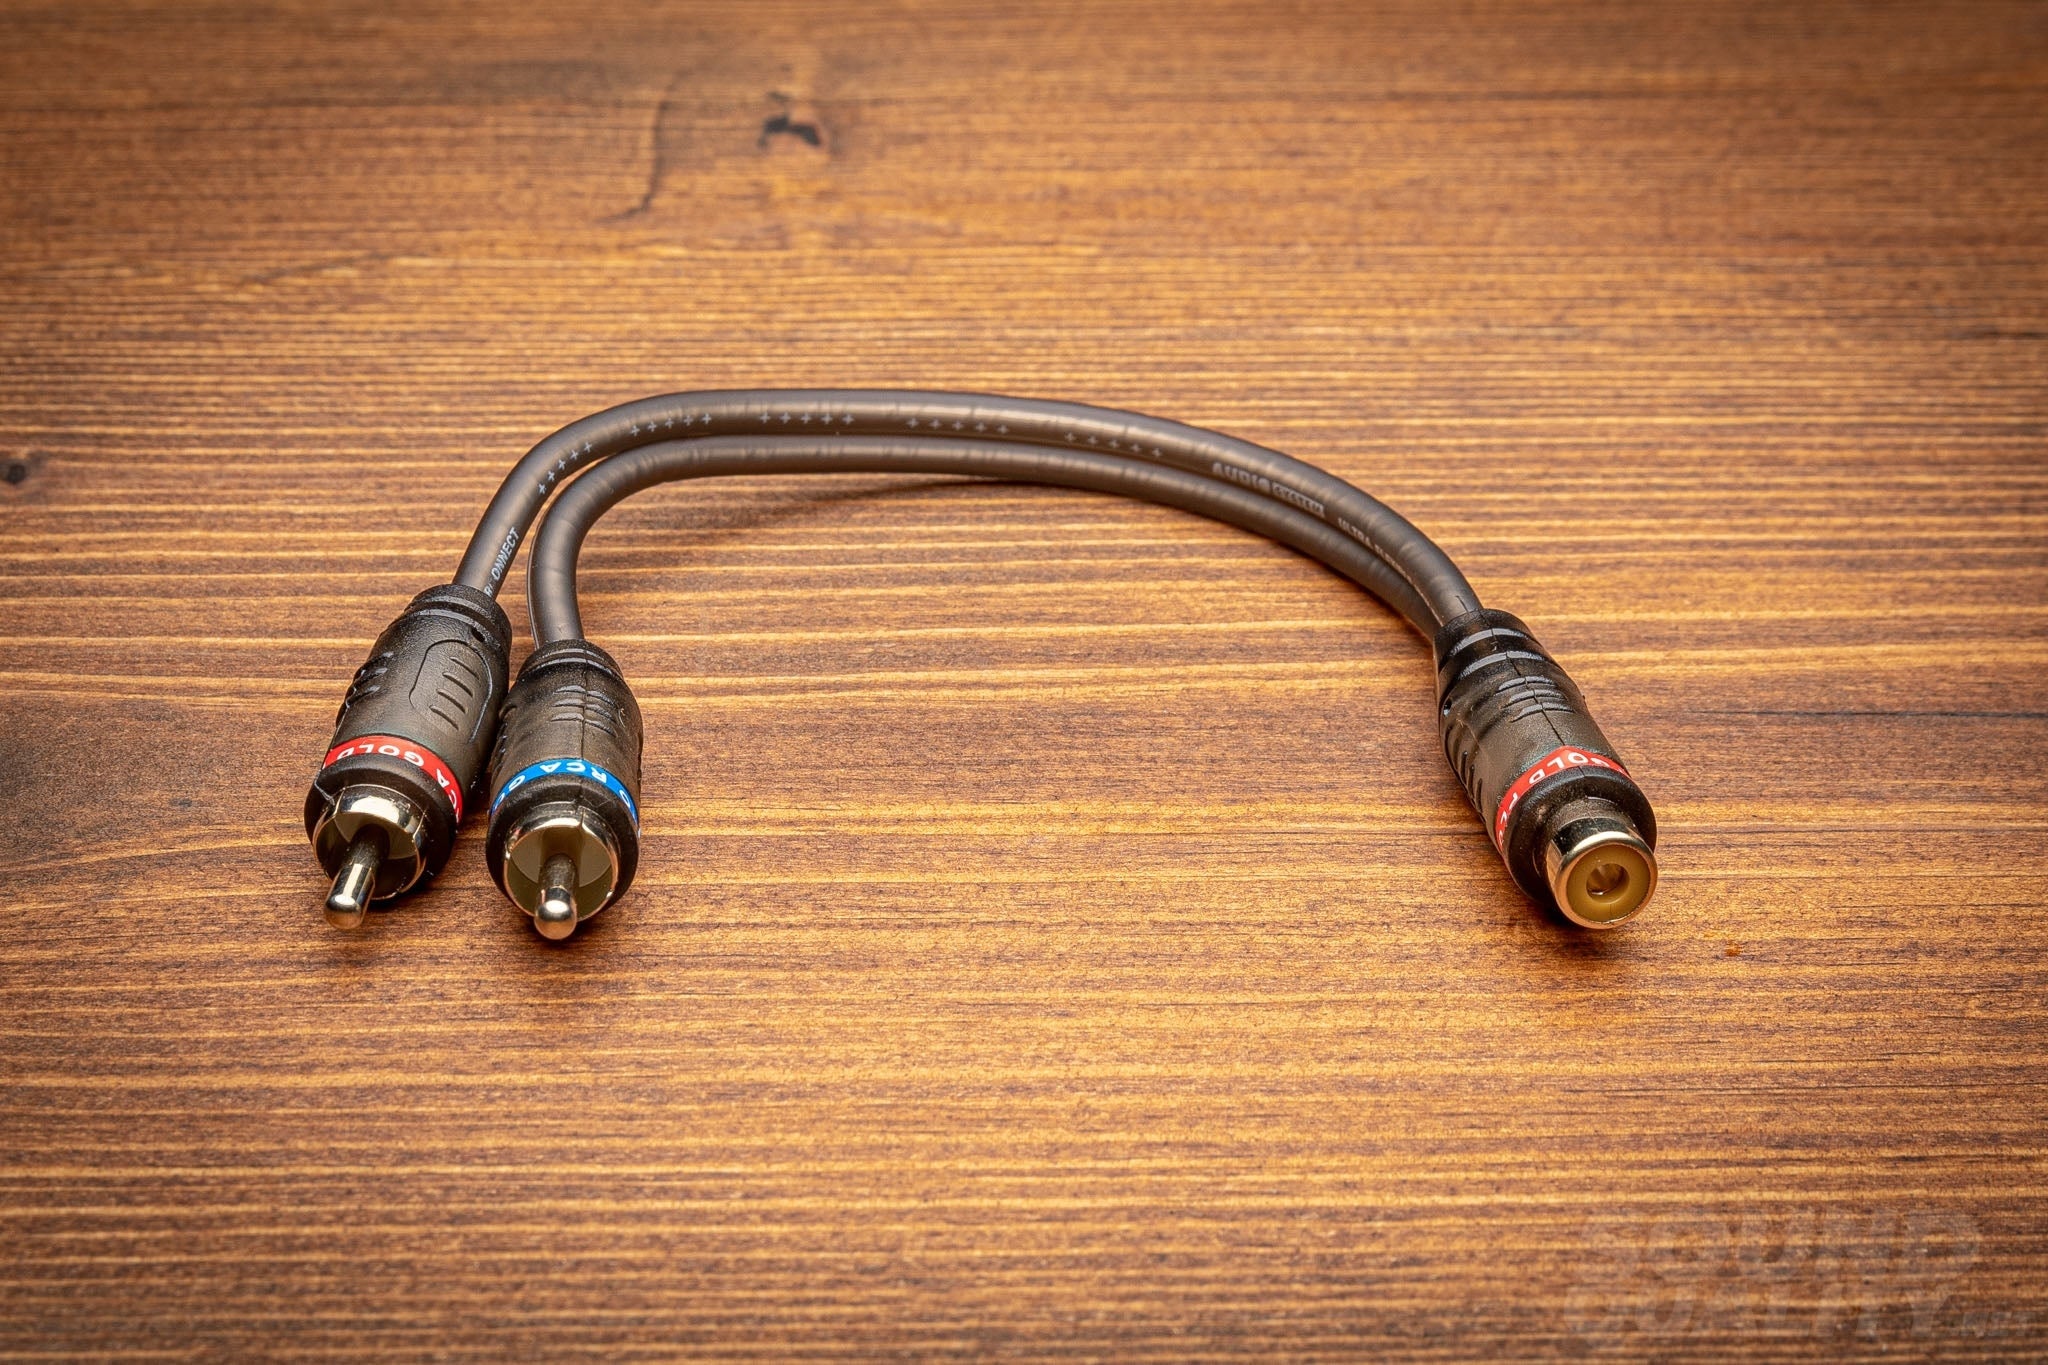 Male RCA to 2 x Female RCA Adapter